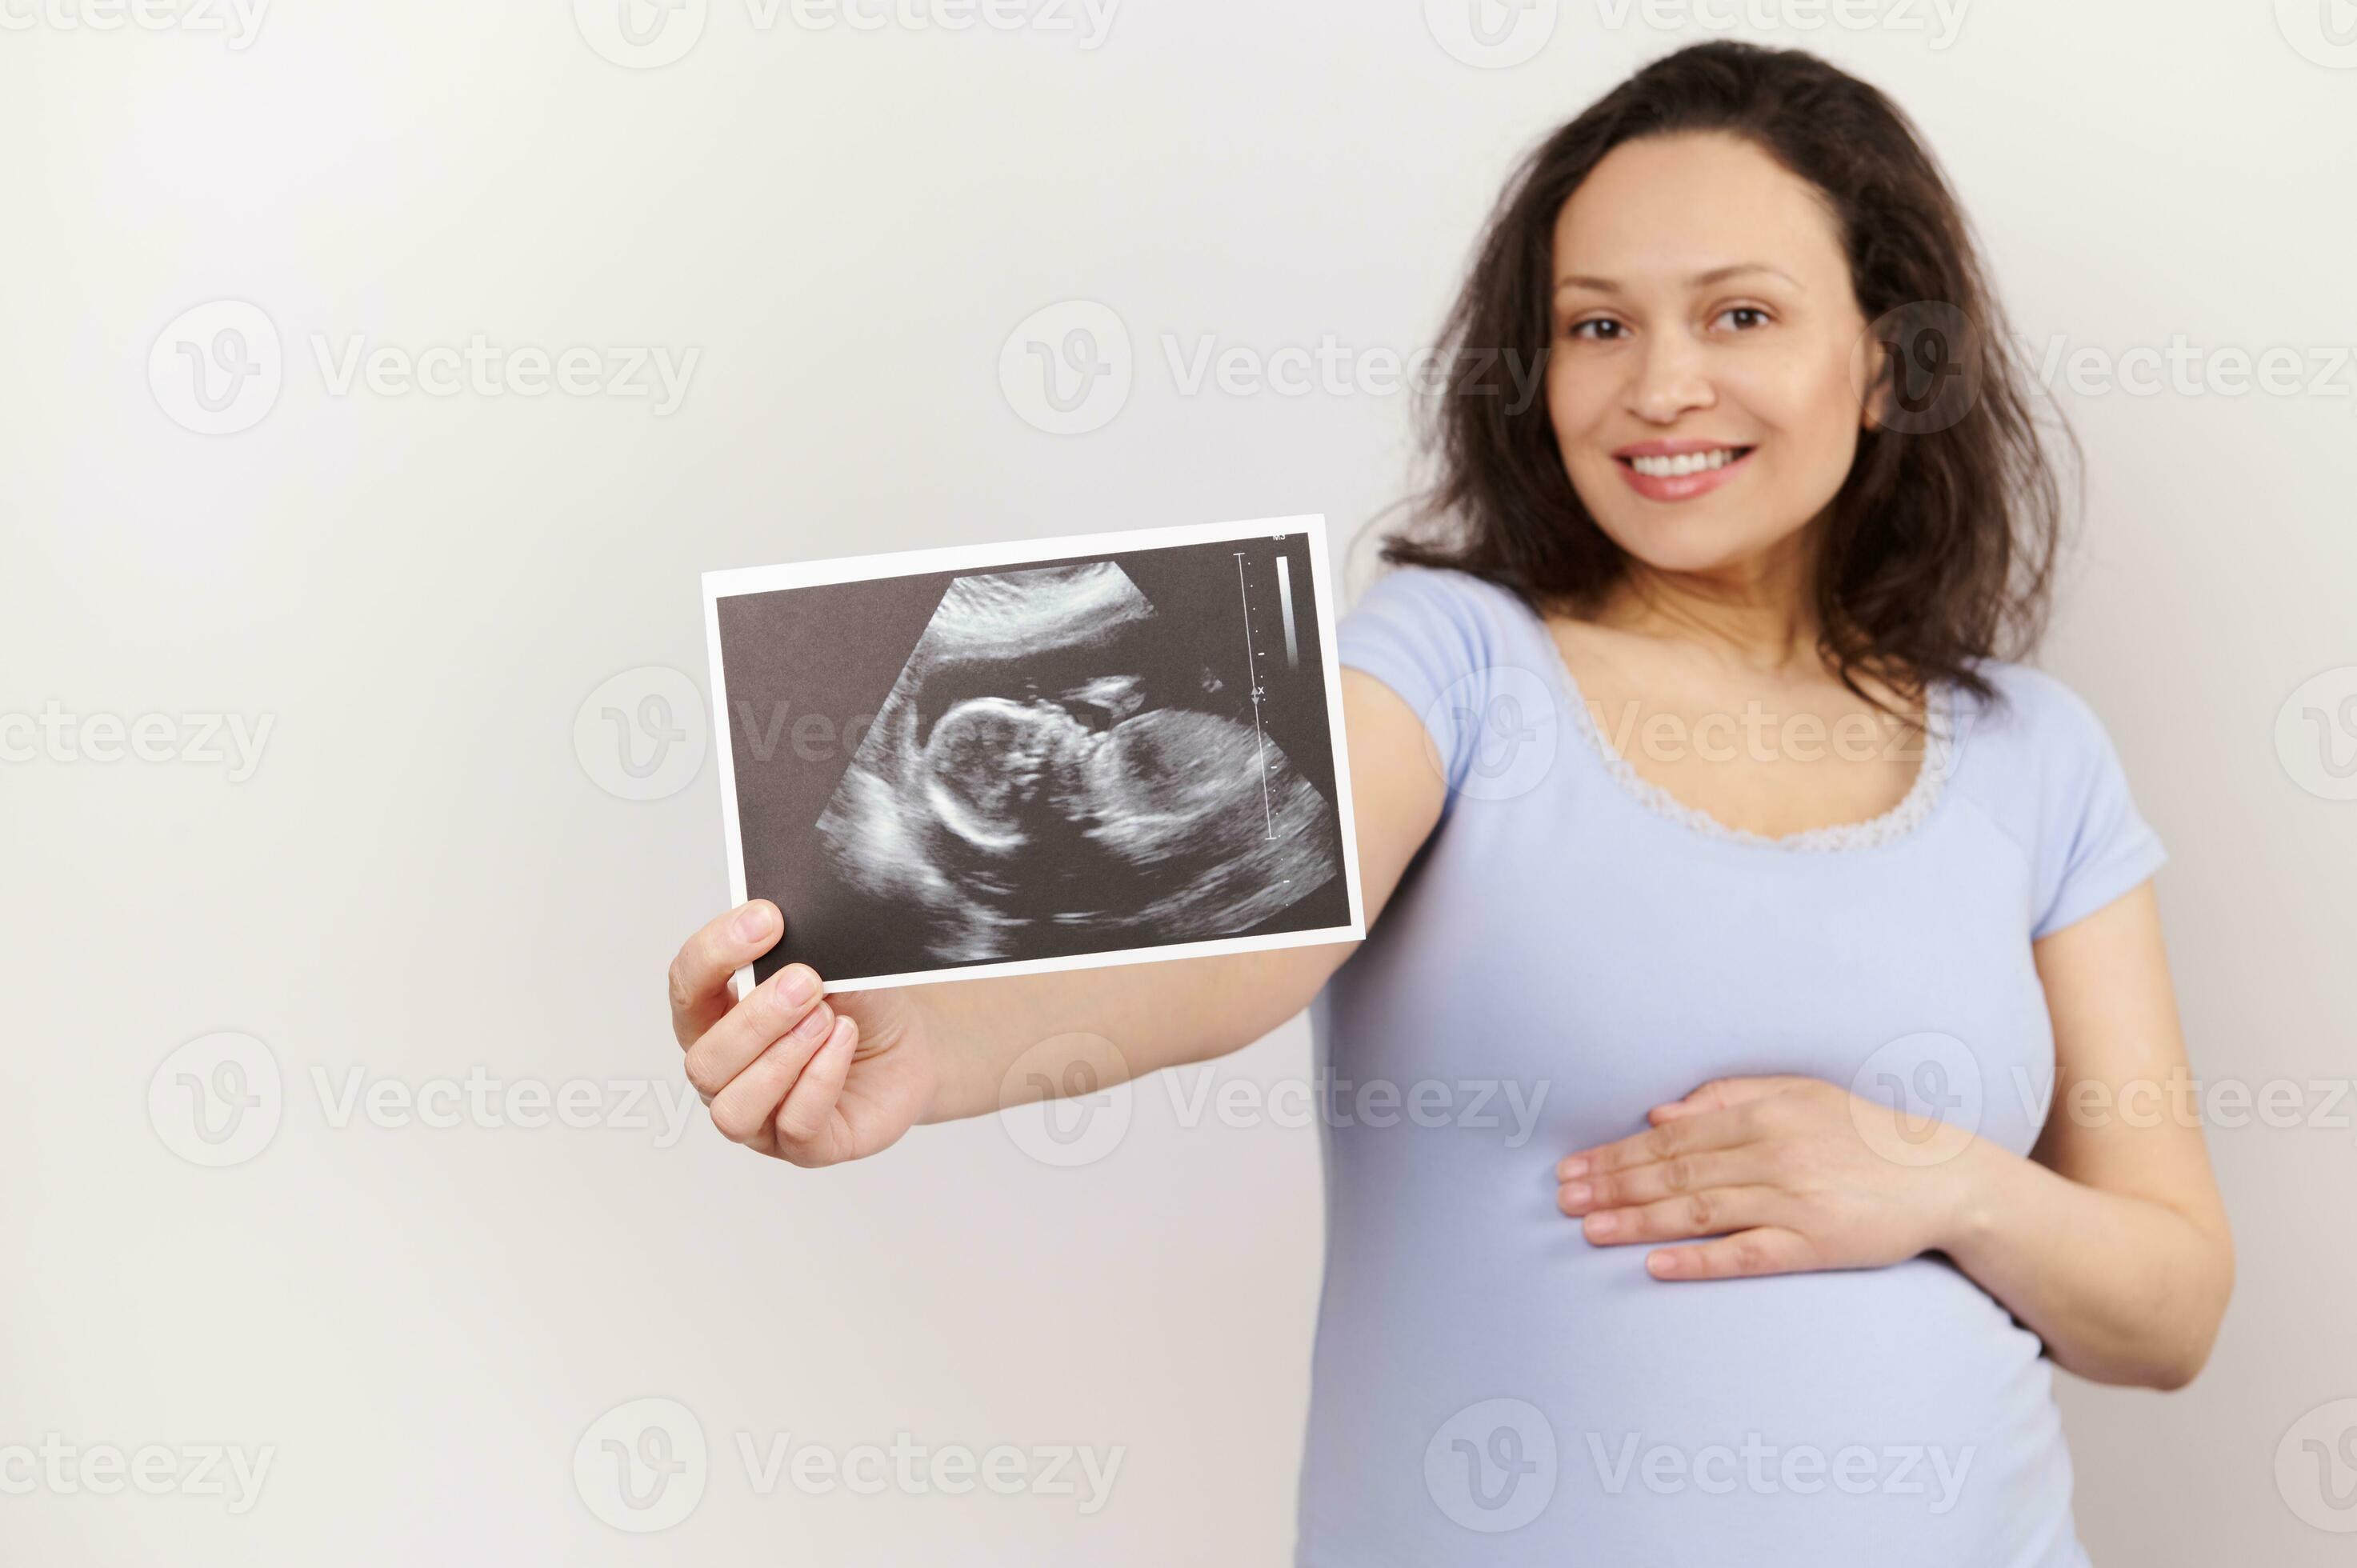 Focus on ultrasound scan image, baby sonography in the hand of a